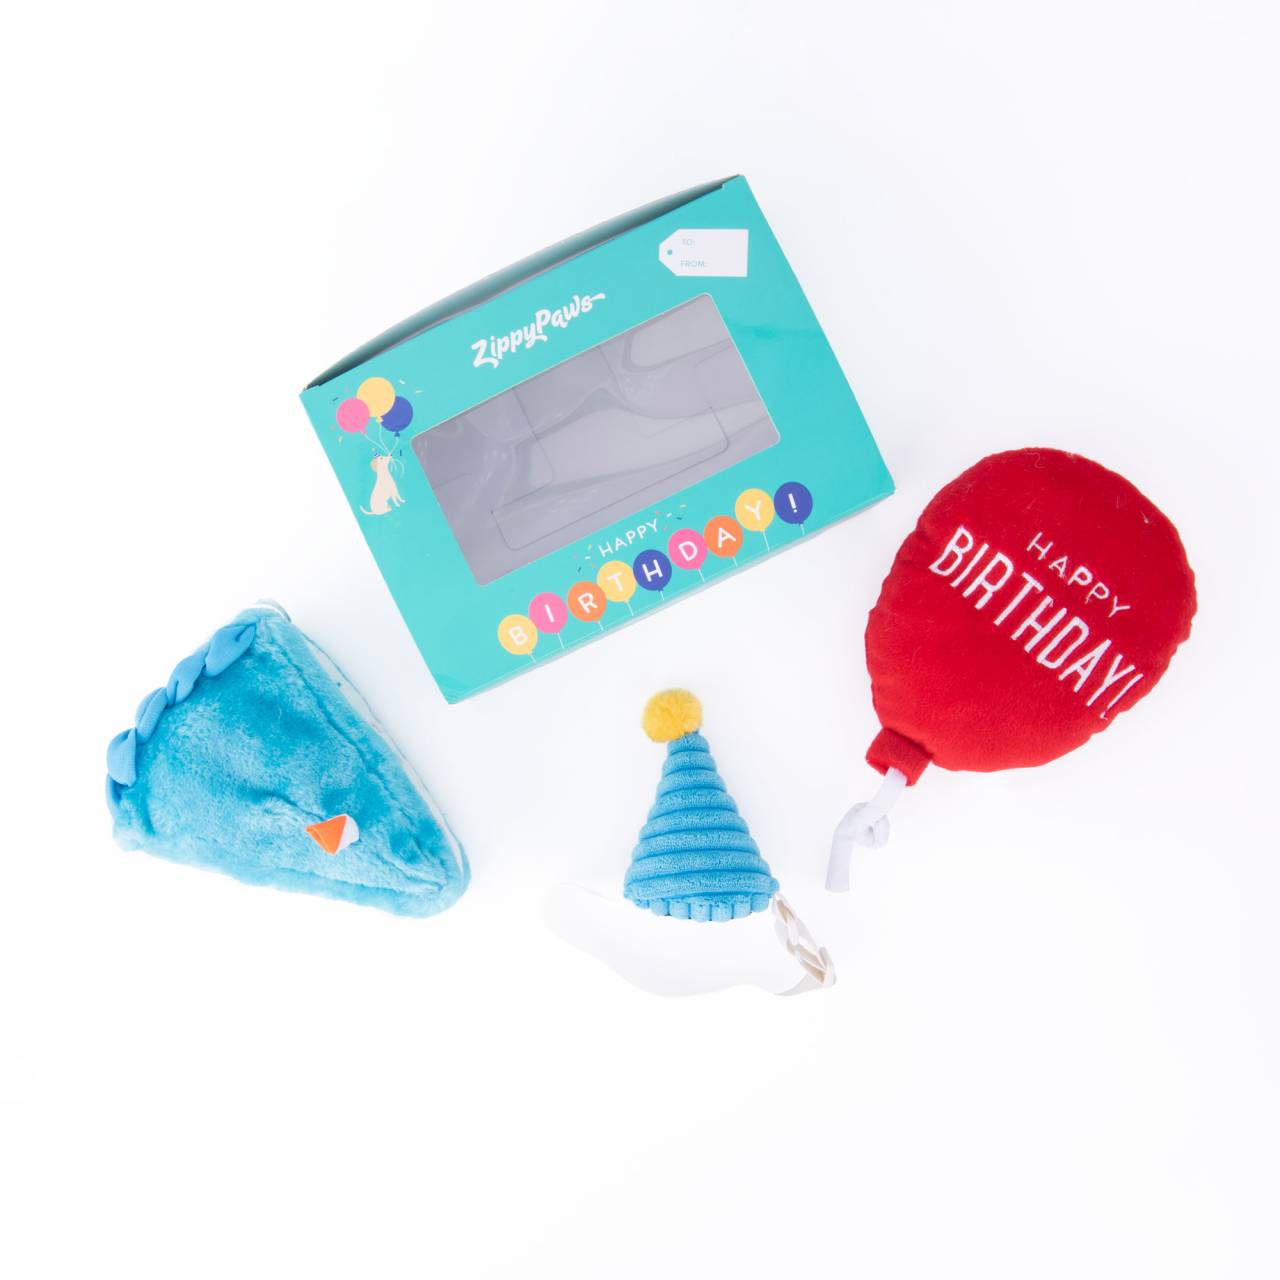 Zippy Paws Birthday Box with Cake, Balloon & Party Hat - blue